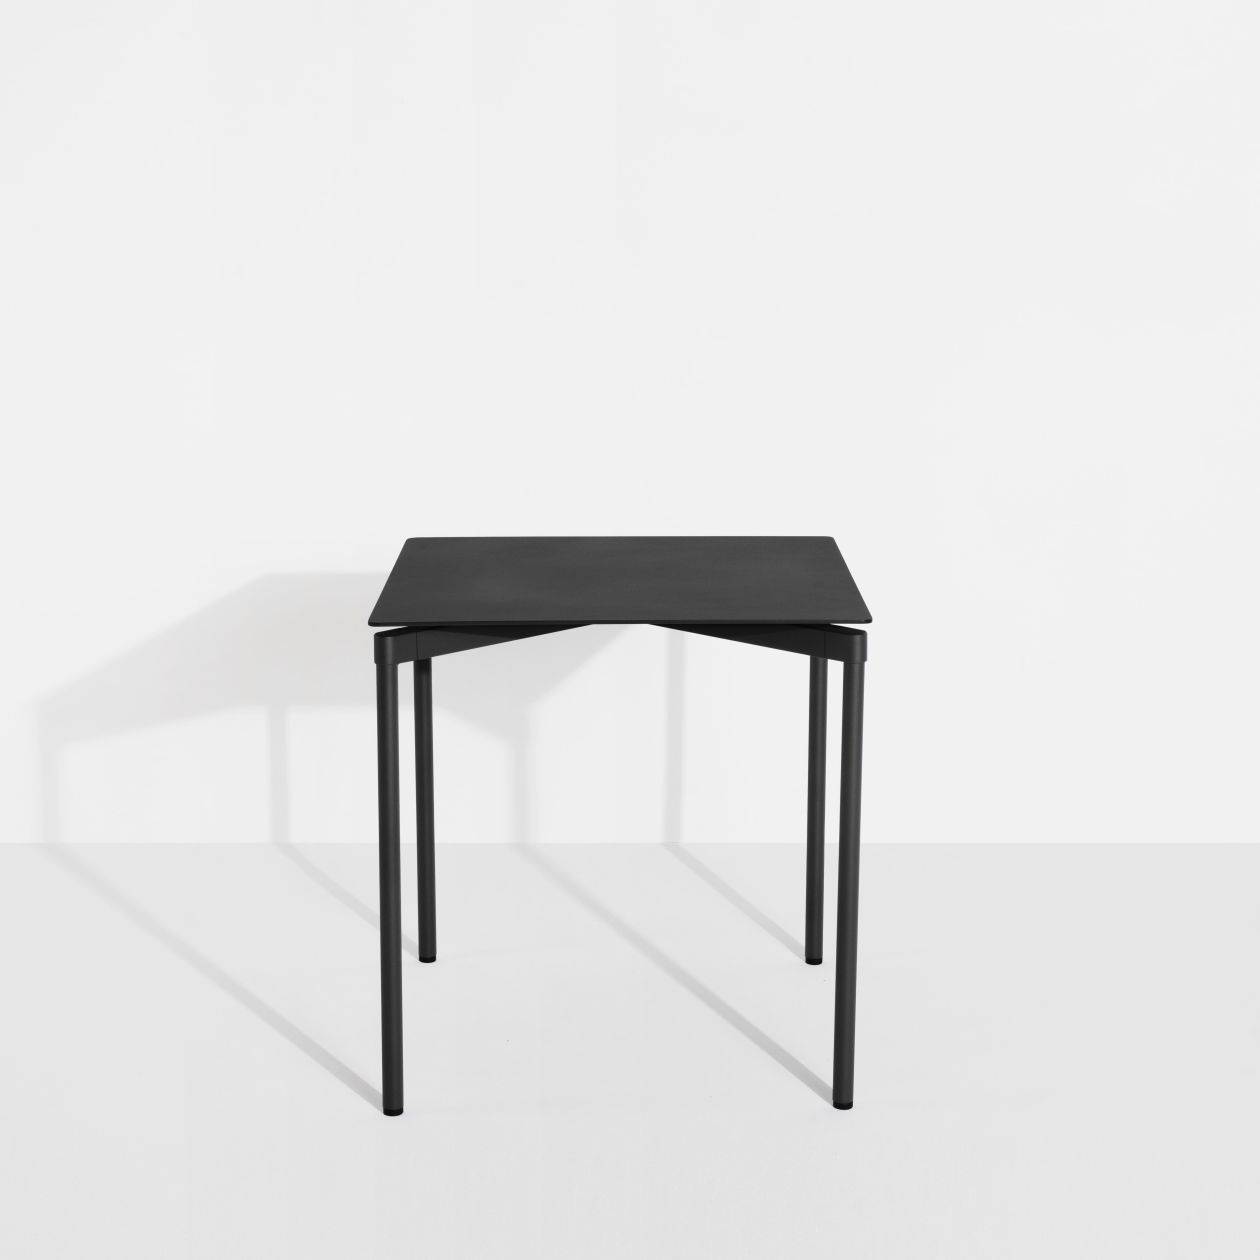 Fromme Square Table - Black